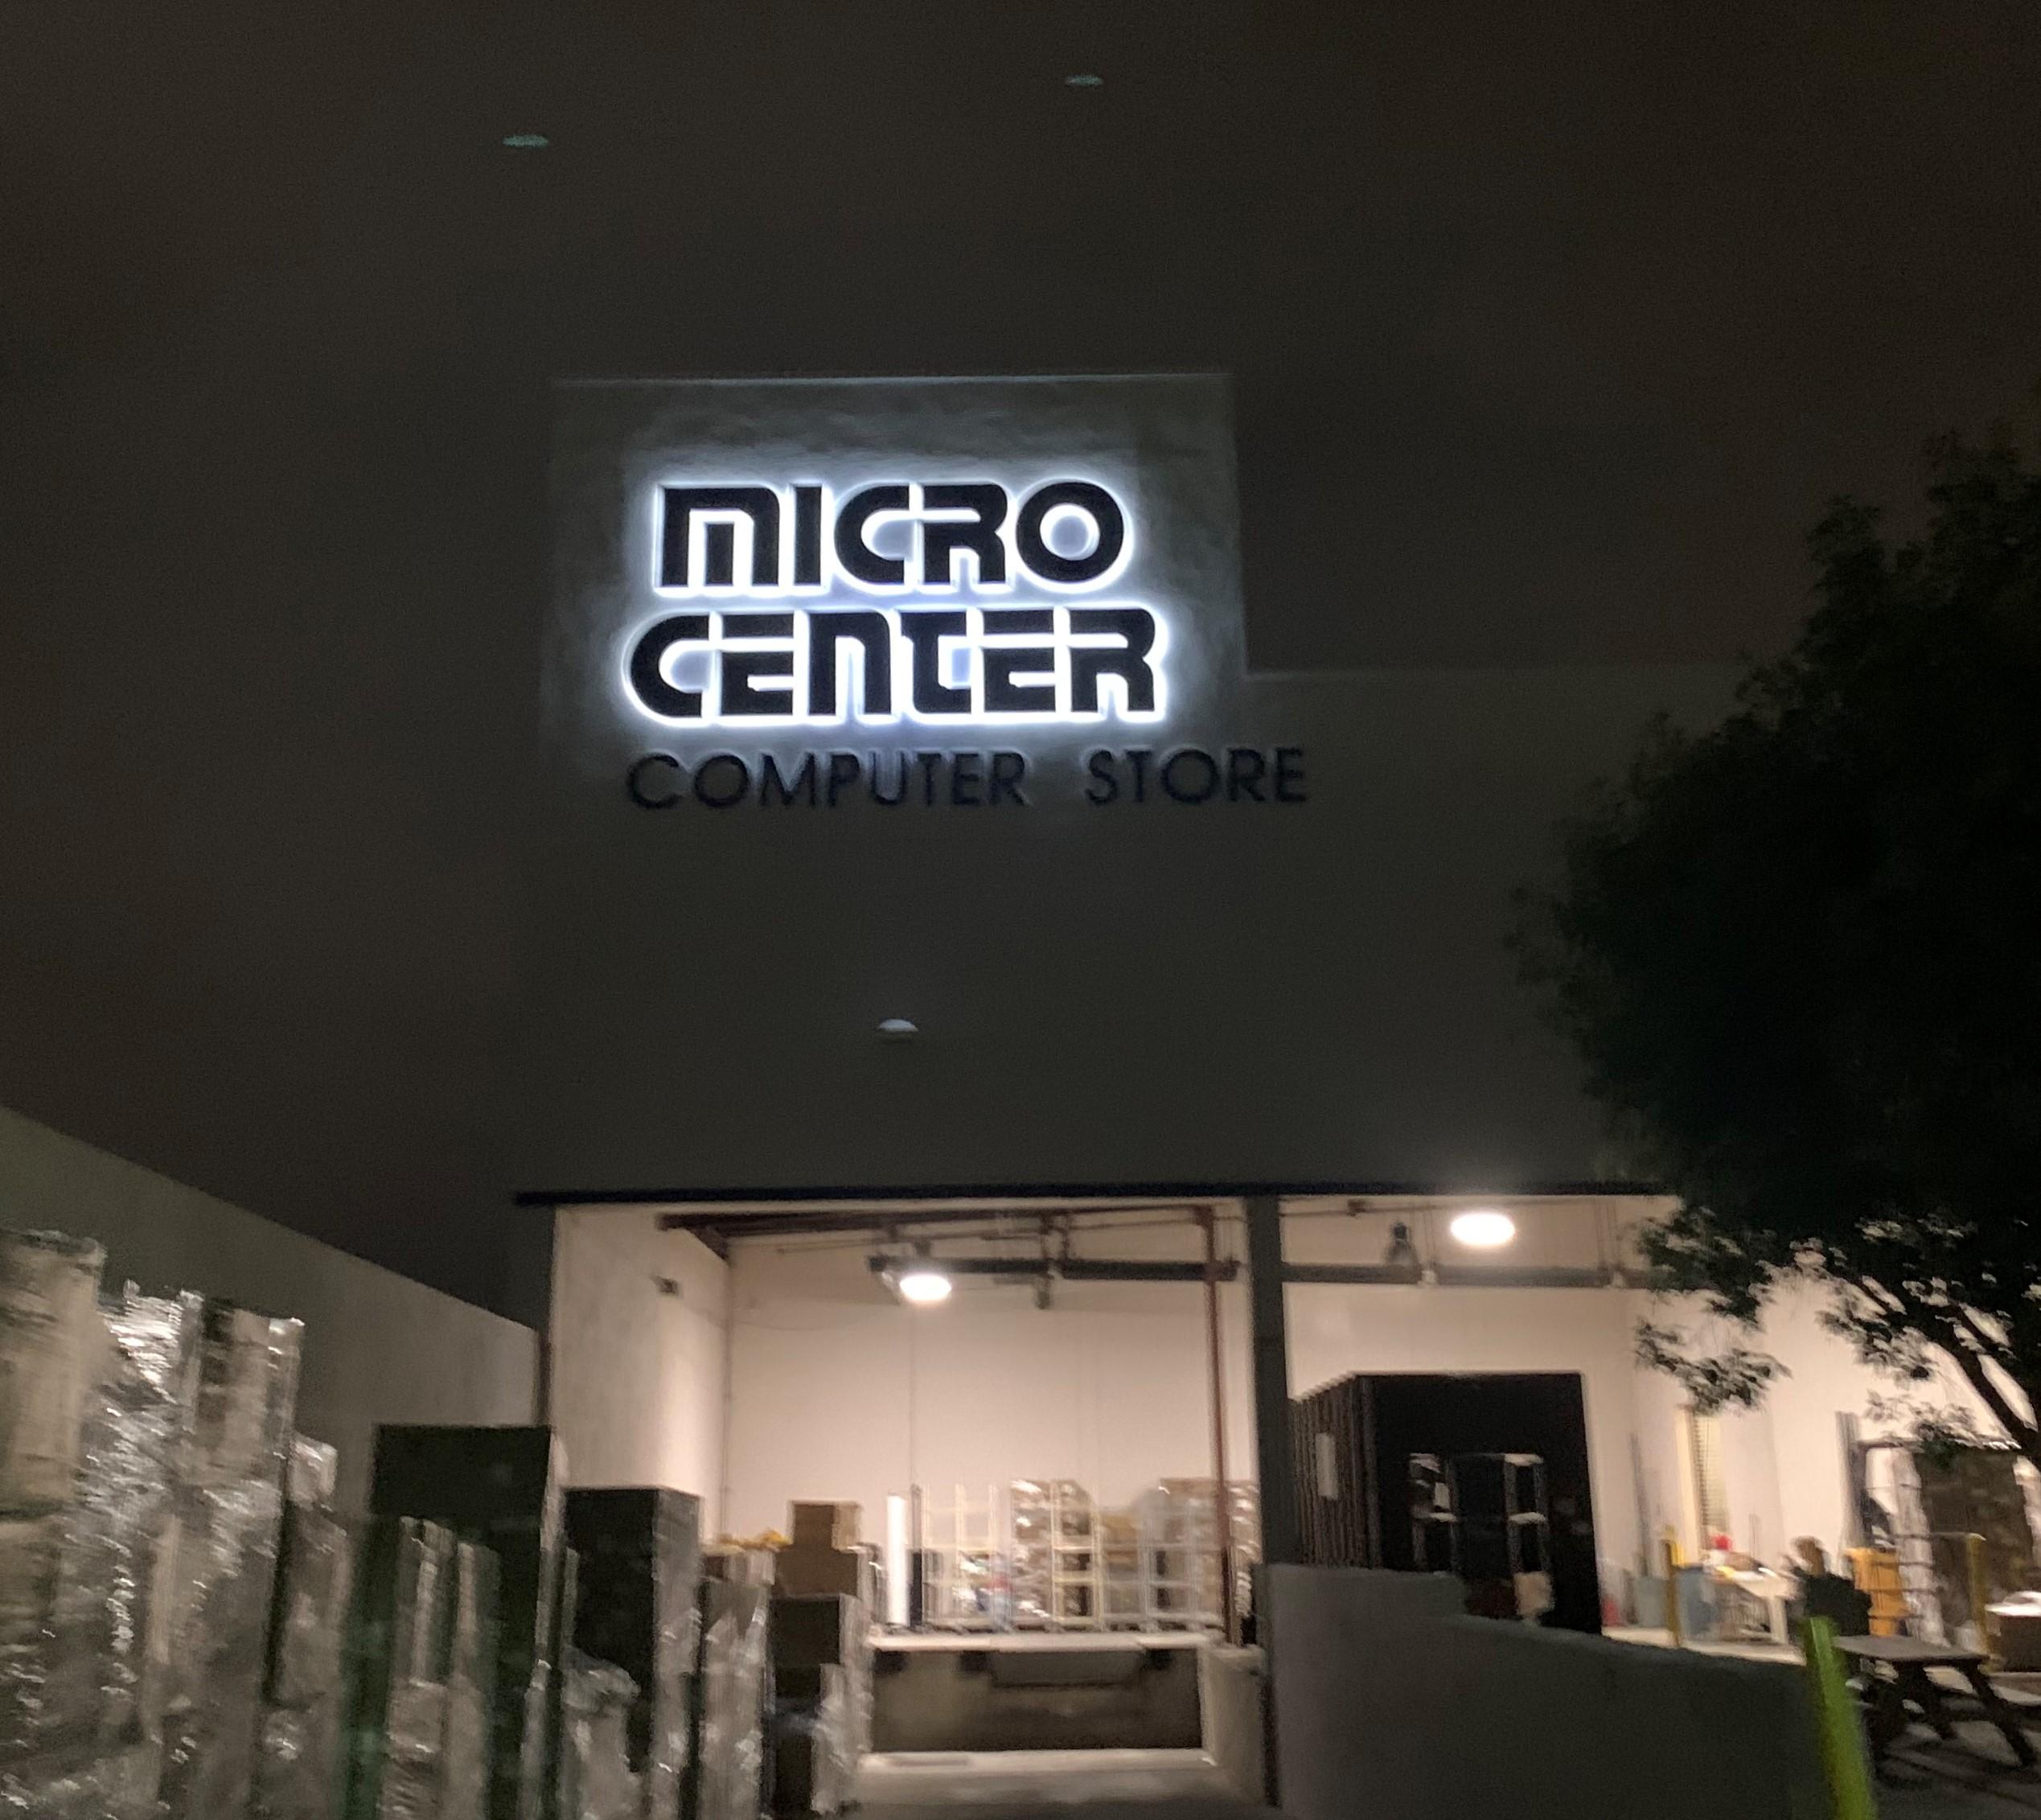 This is the LED sign retrofit we did for Micro Center's Tustin location. A computer store needs eye-catching and modern-looking signage to attract customers.